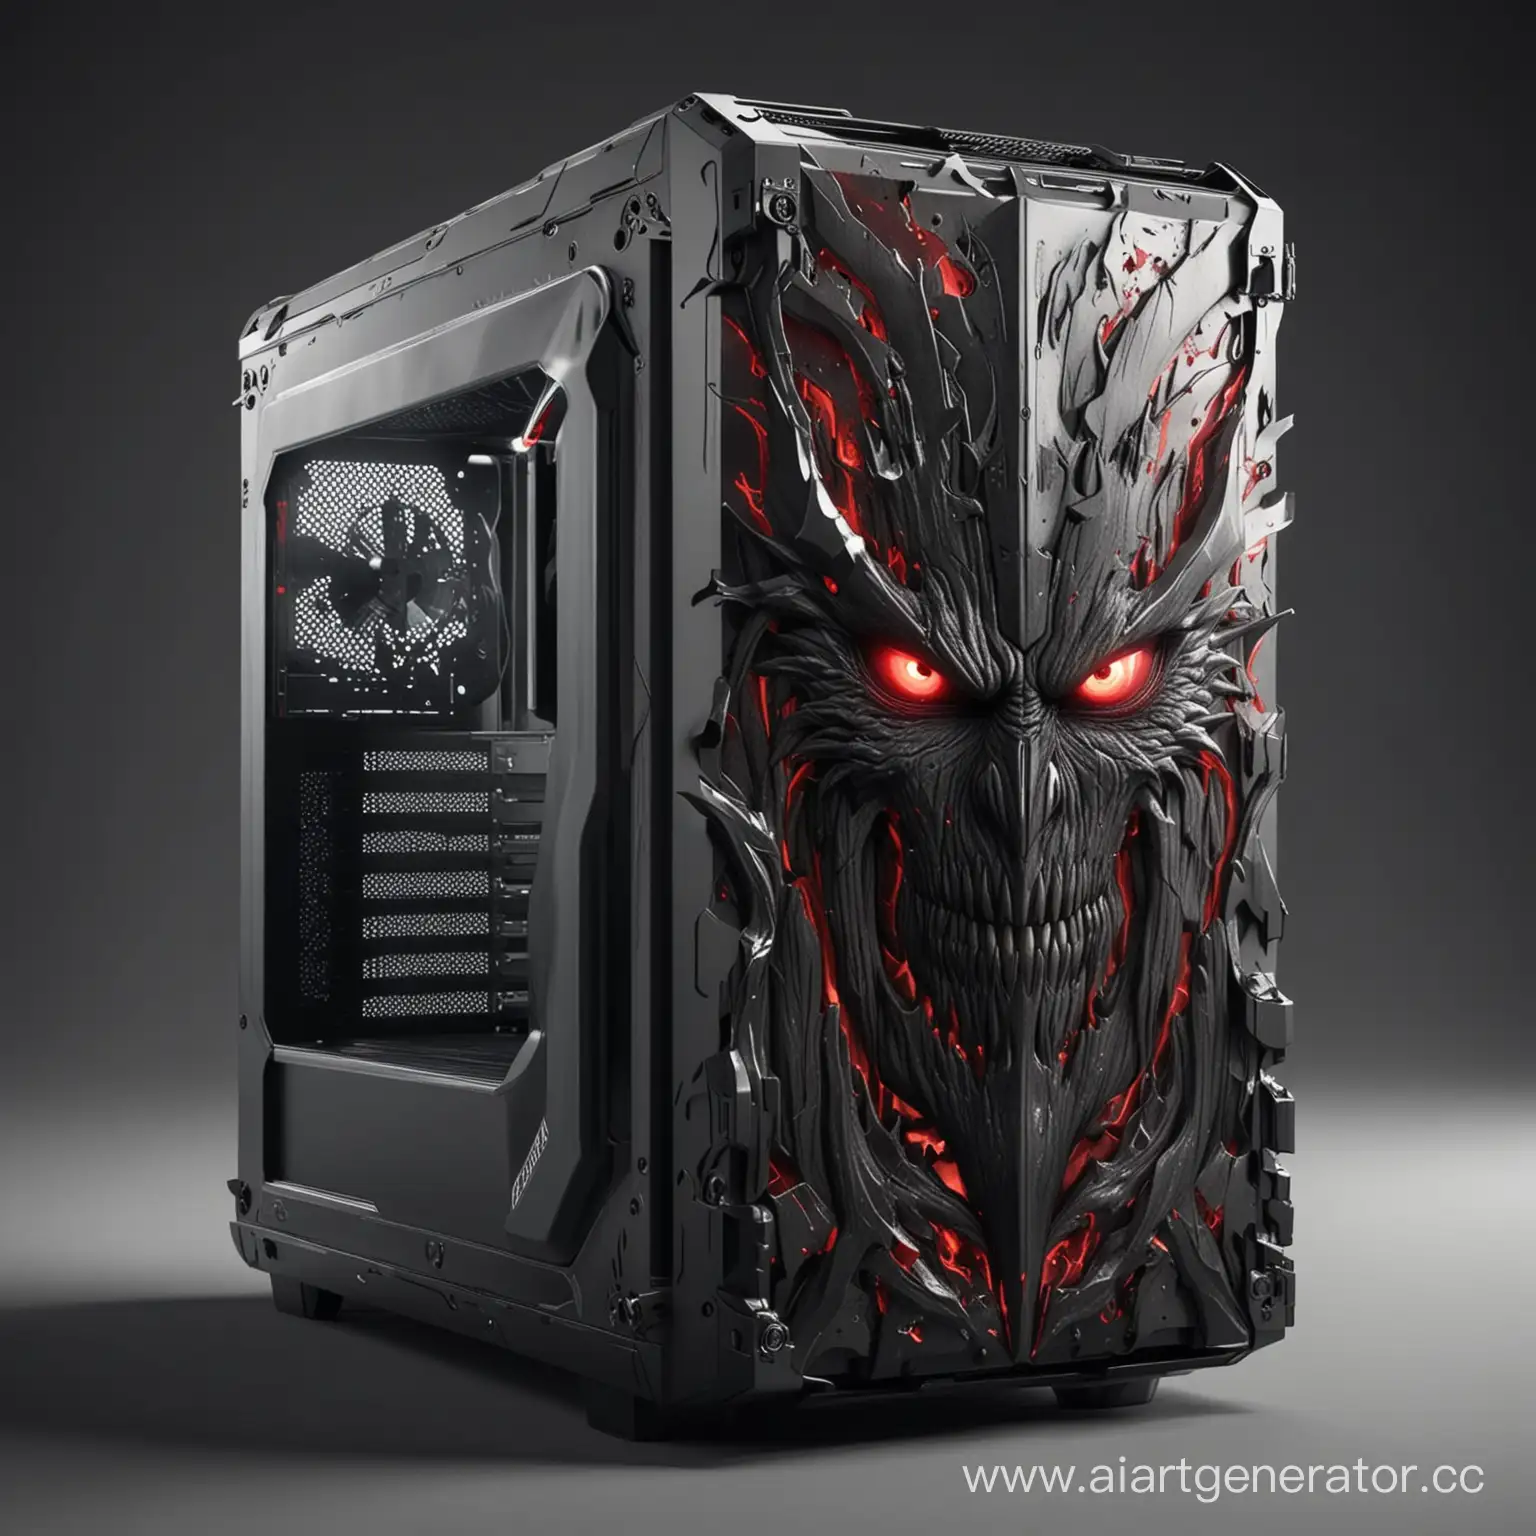 realistic 3D image of a computer gaming case in the style of the popular anime "Berserk"